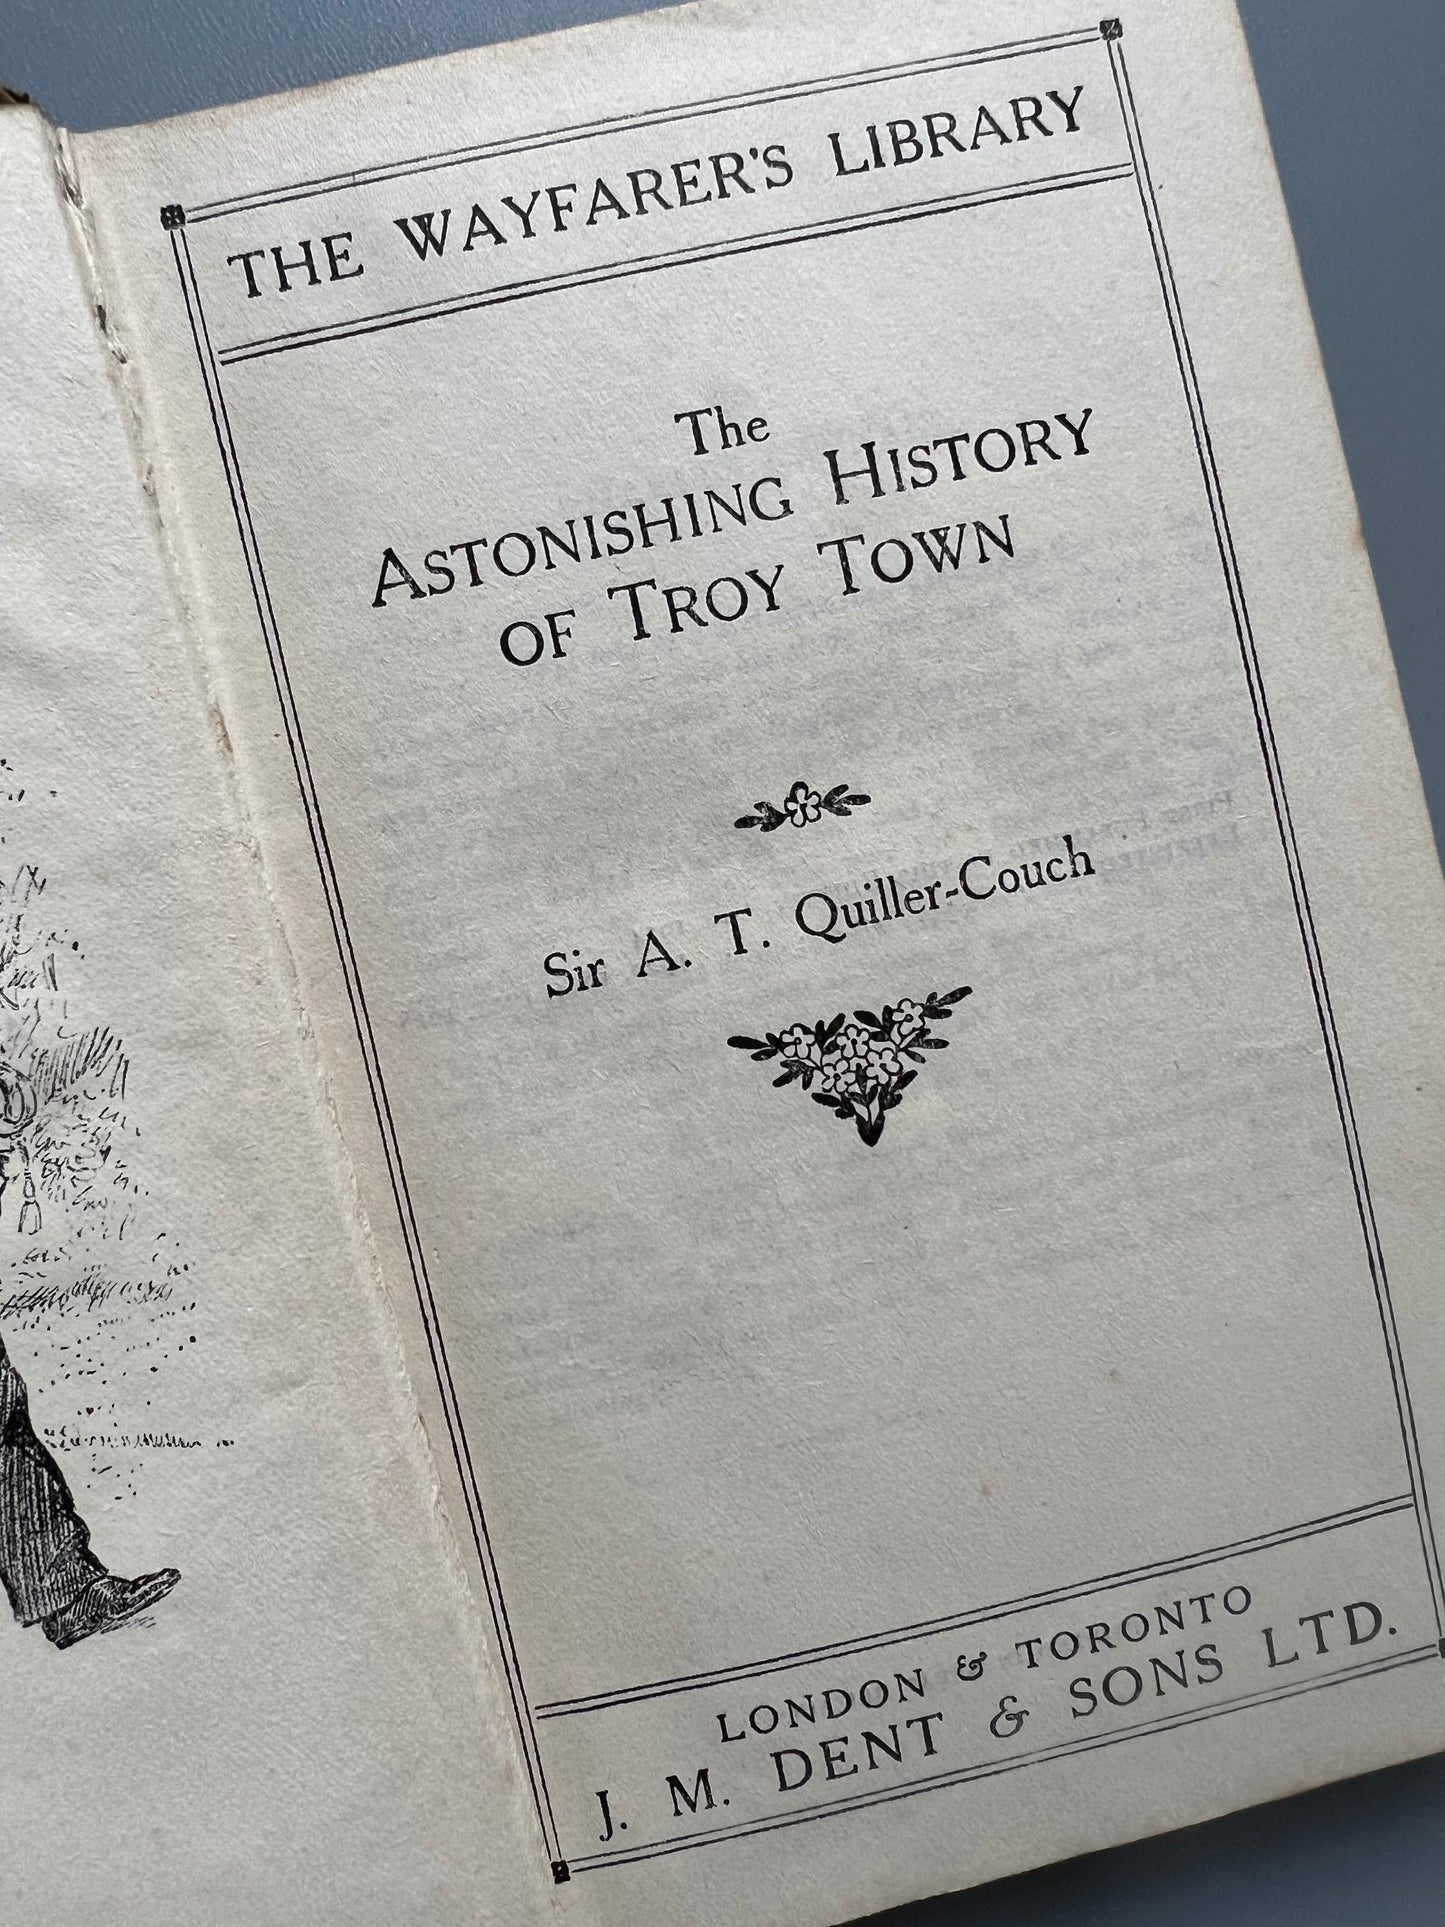 The astonishing history of Troy Town, Sir A. T. Quiller-Couch - J. M. Dent & Sons, ca. 1915